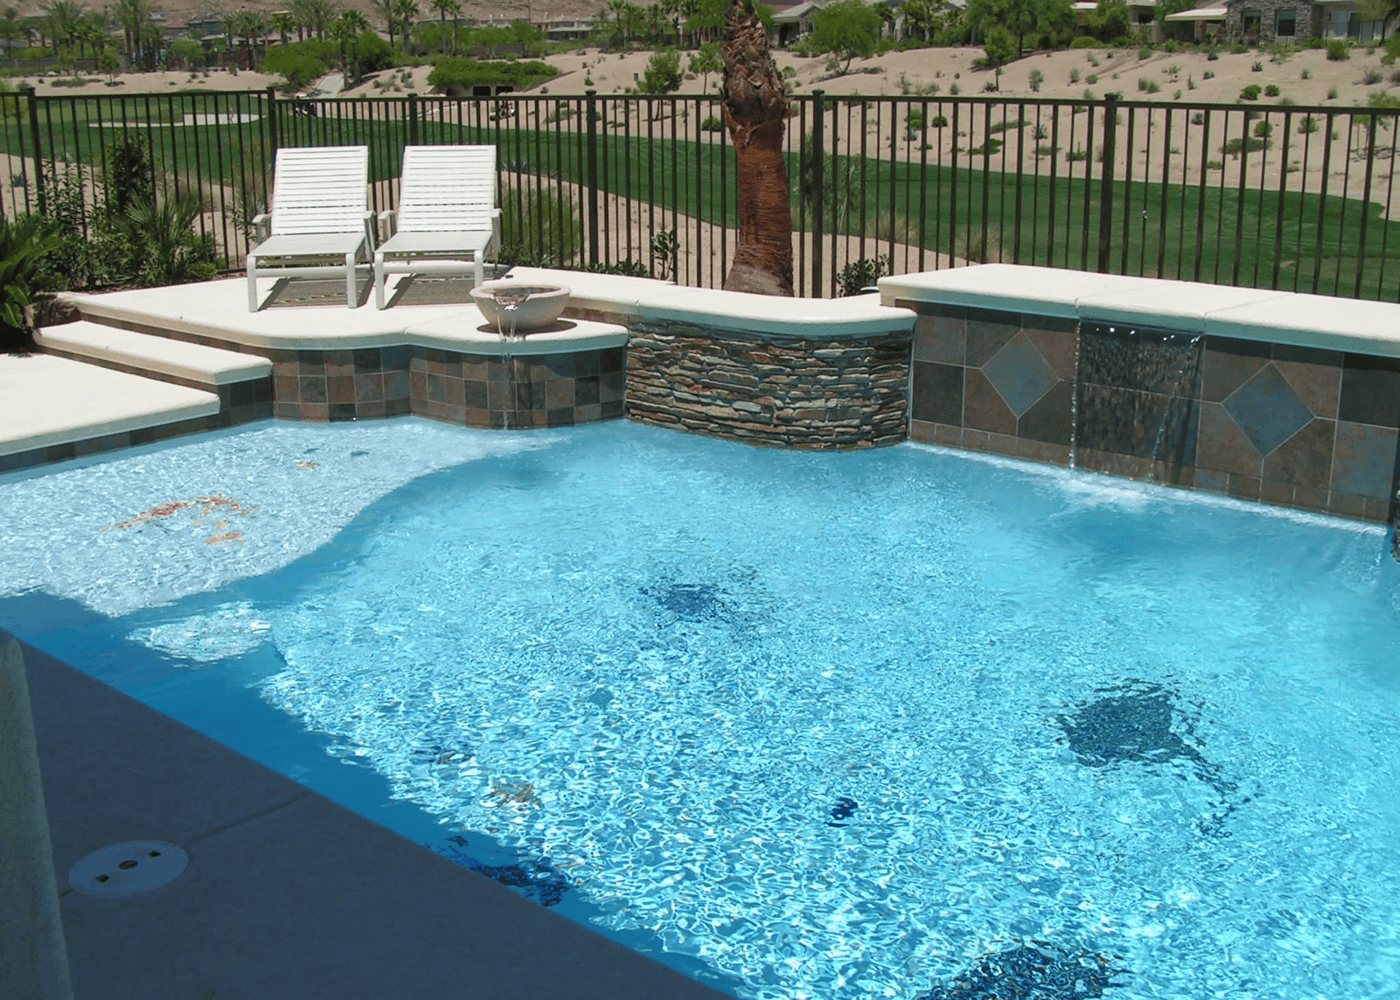 A filled in-ground swimming pool showcasing sheer descents and a fire and water bowl feature.